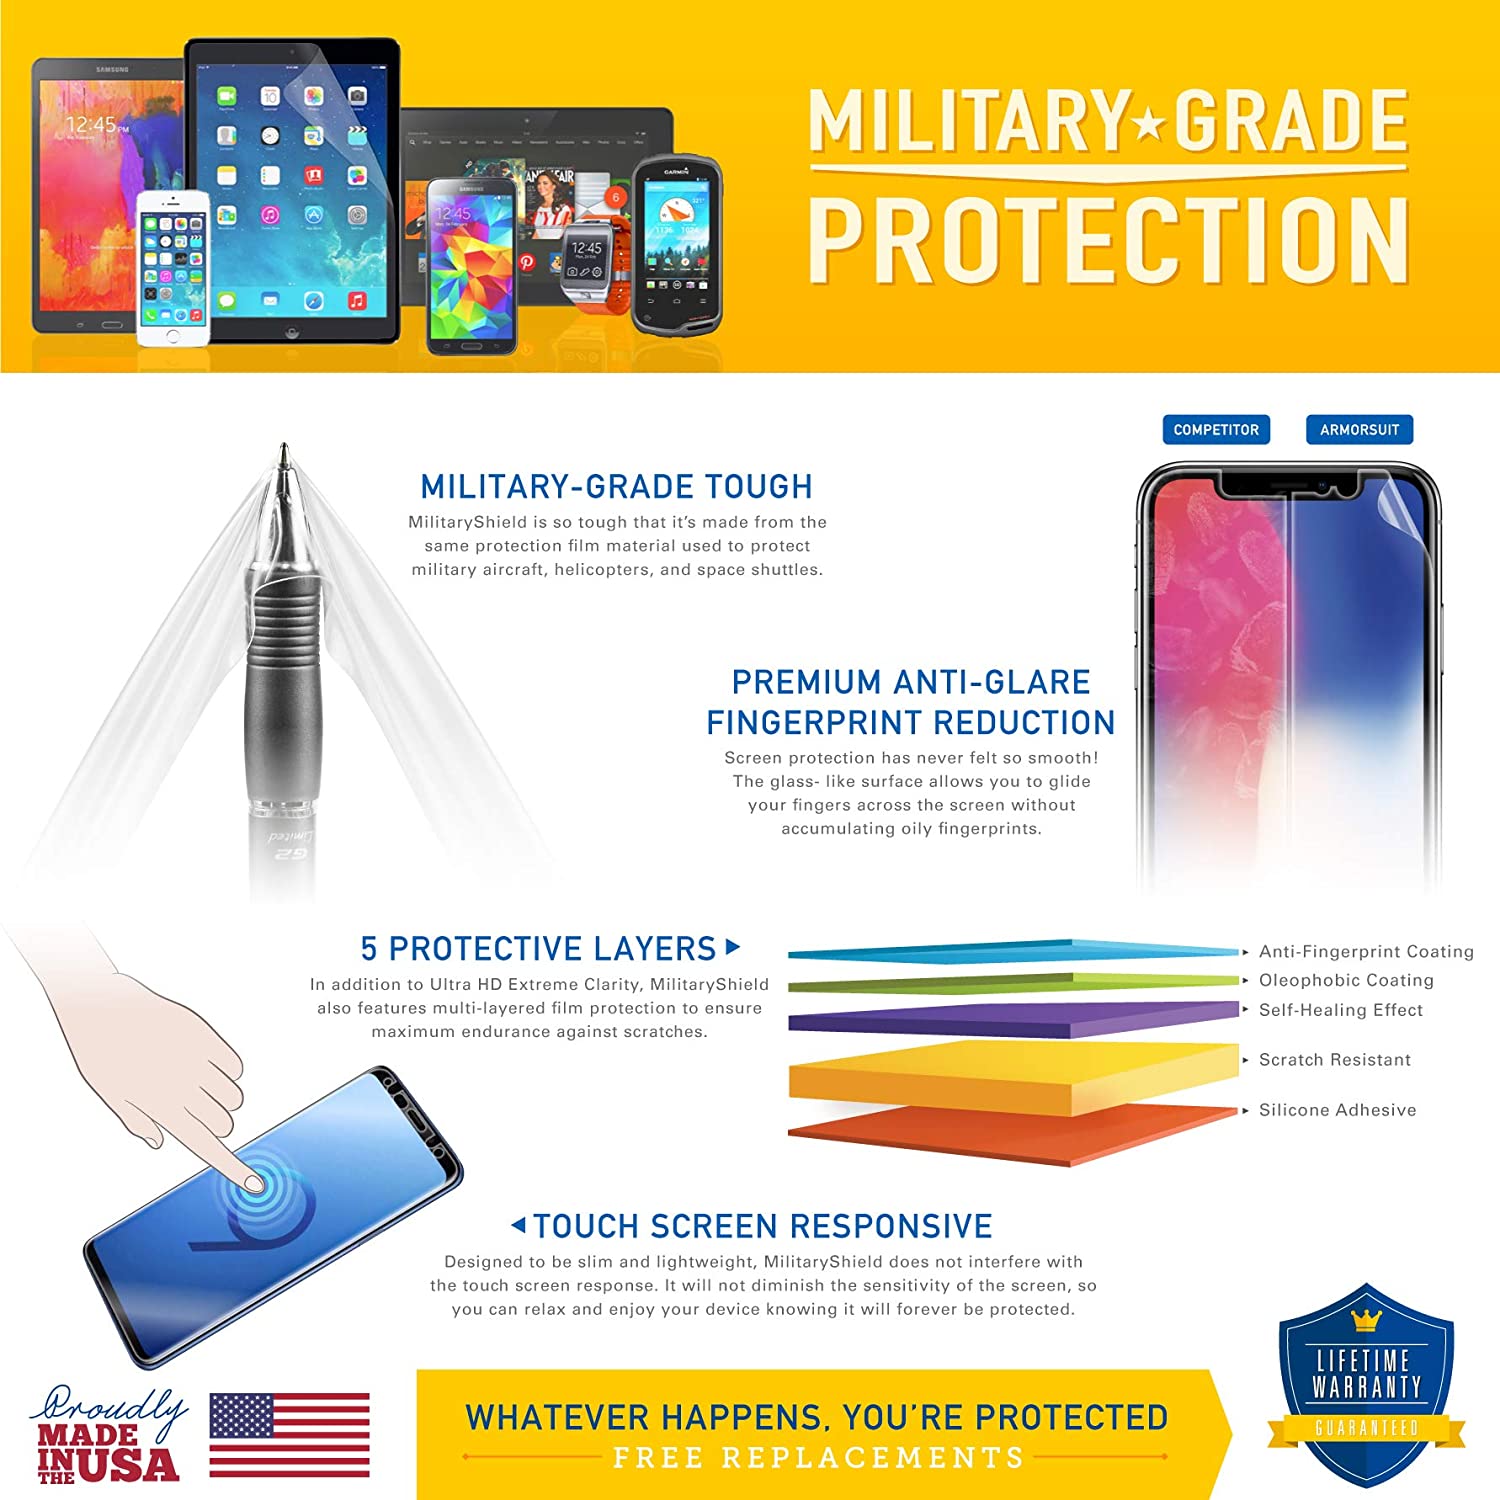 [2-Pack] Samsung Galaxy S21 Screen Protector (6.2)